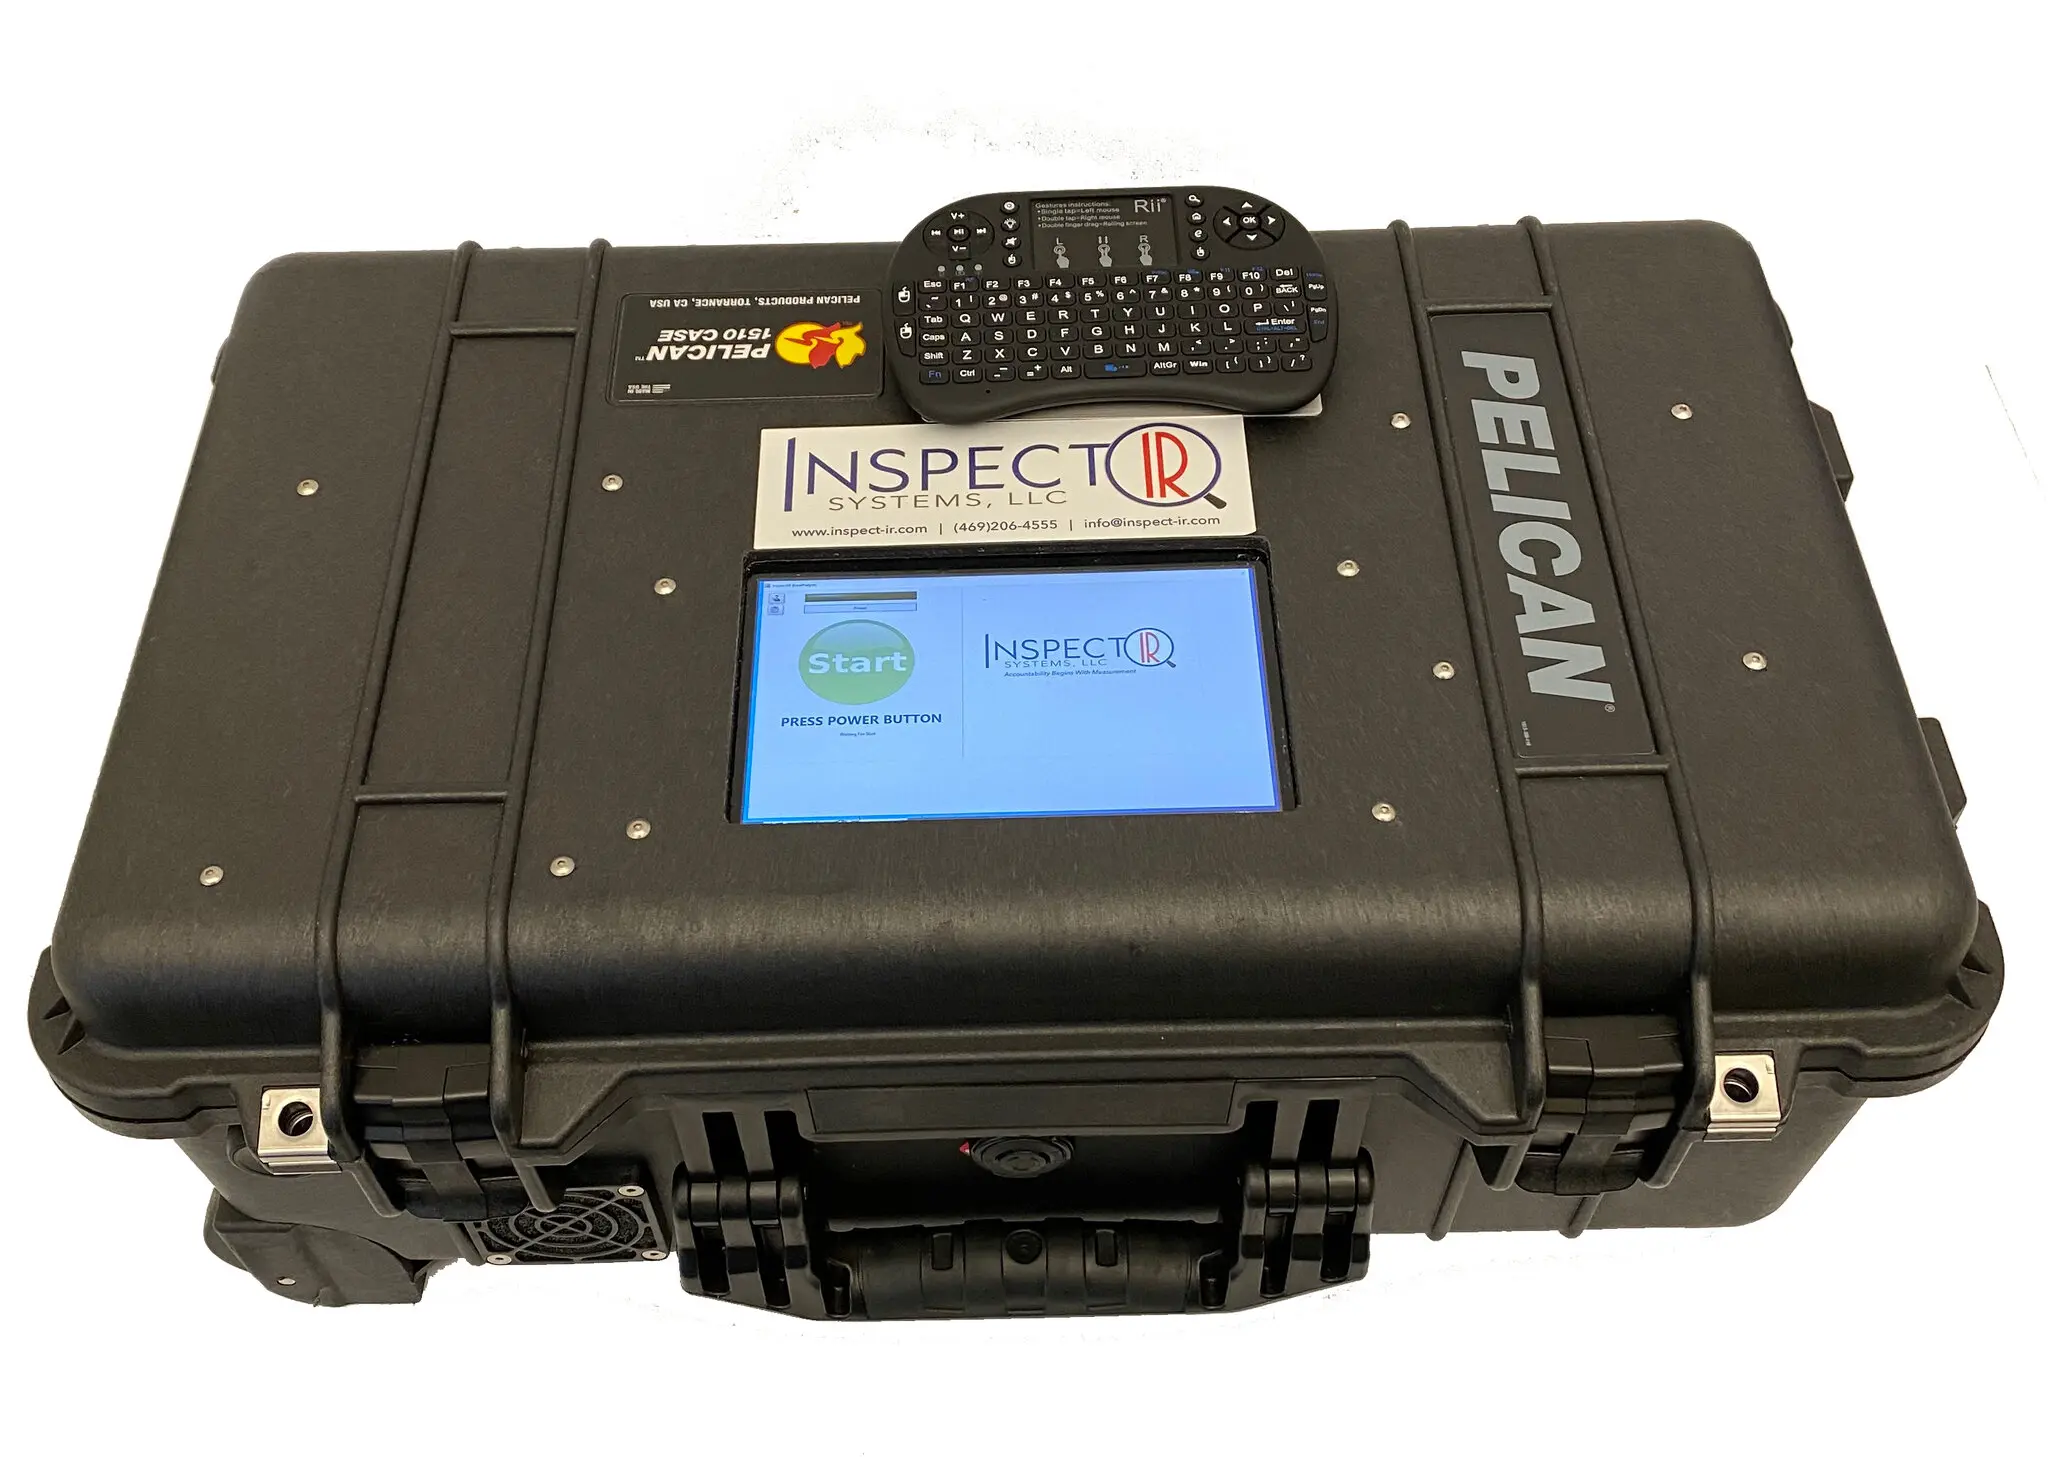 Emergency Use Authorization for InspectIR COVID-19 Breath Tests is an Important Milestone in Year-Long Quest to Develop More Breath-Based Diagnostics (InspectIR Systems)